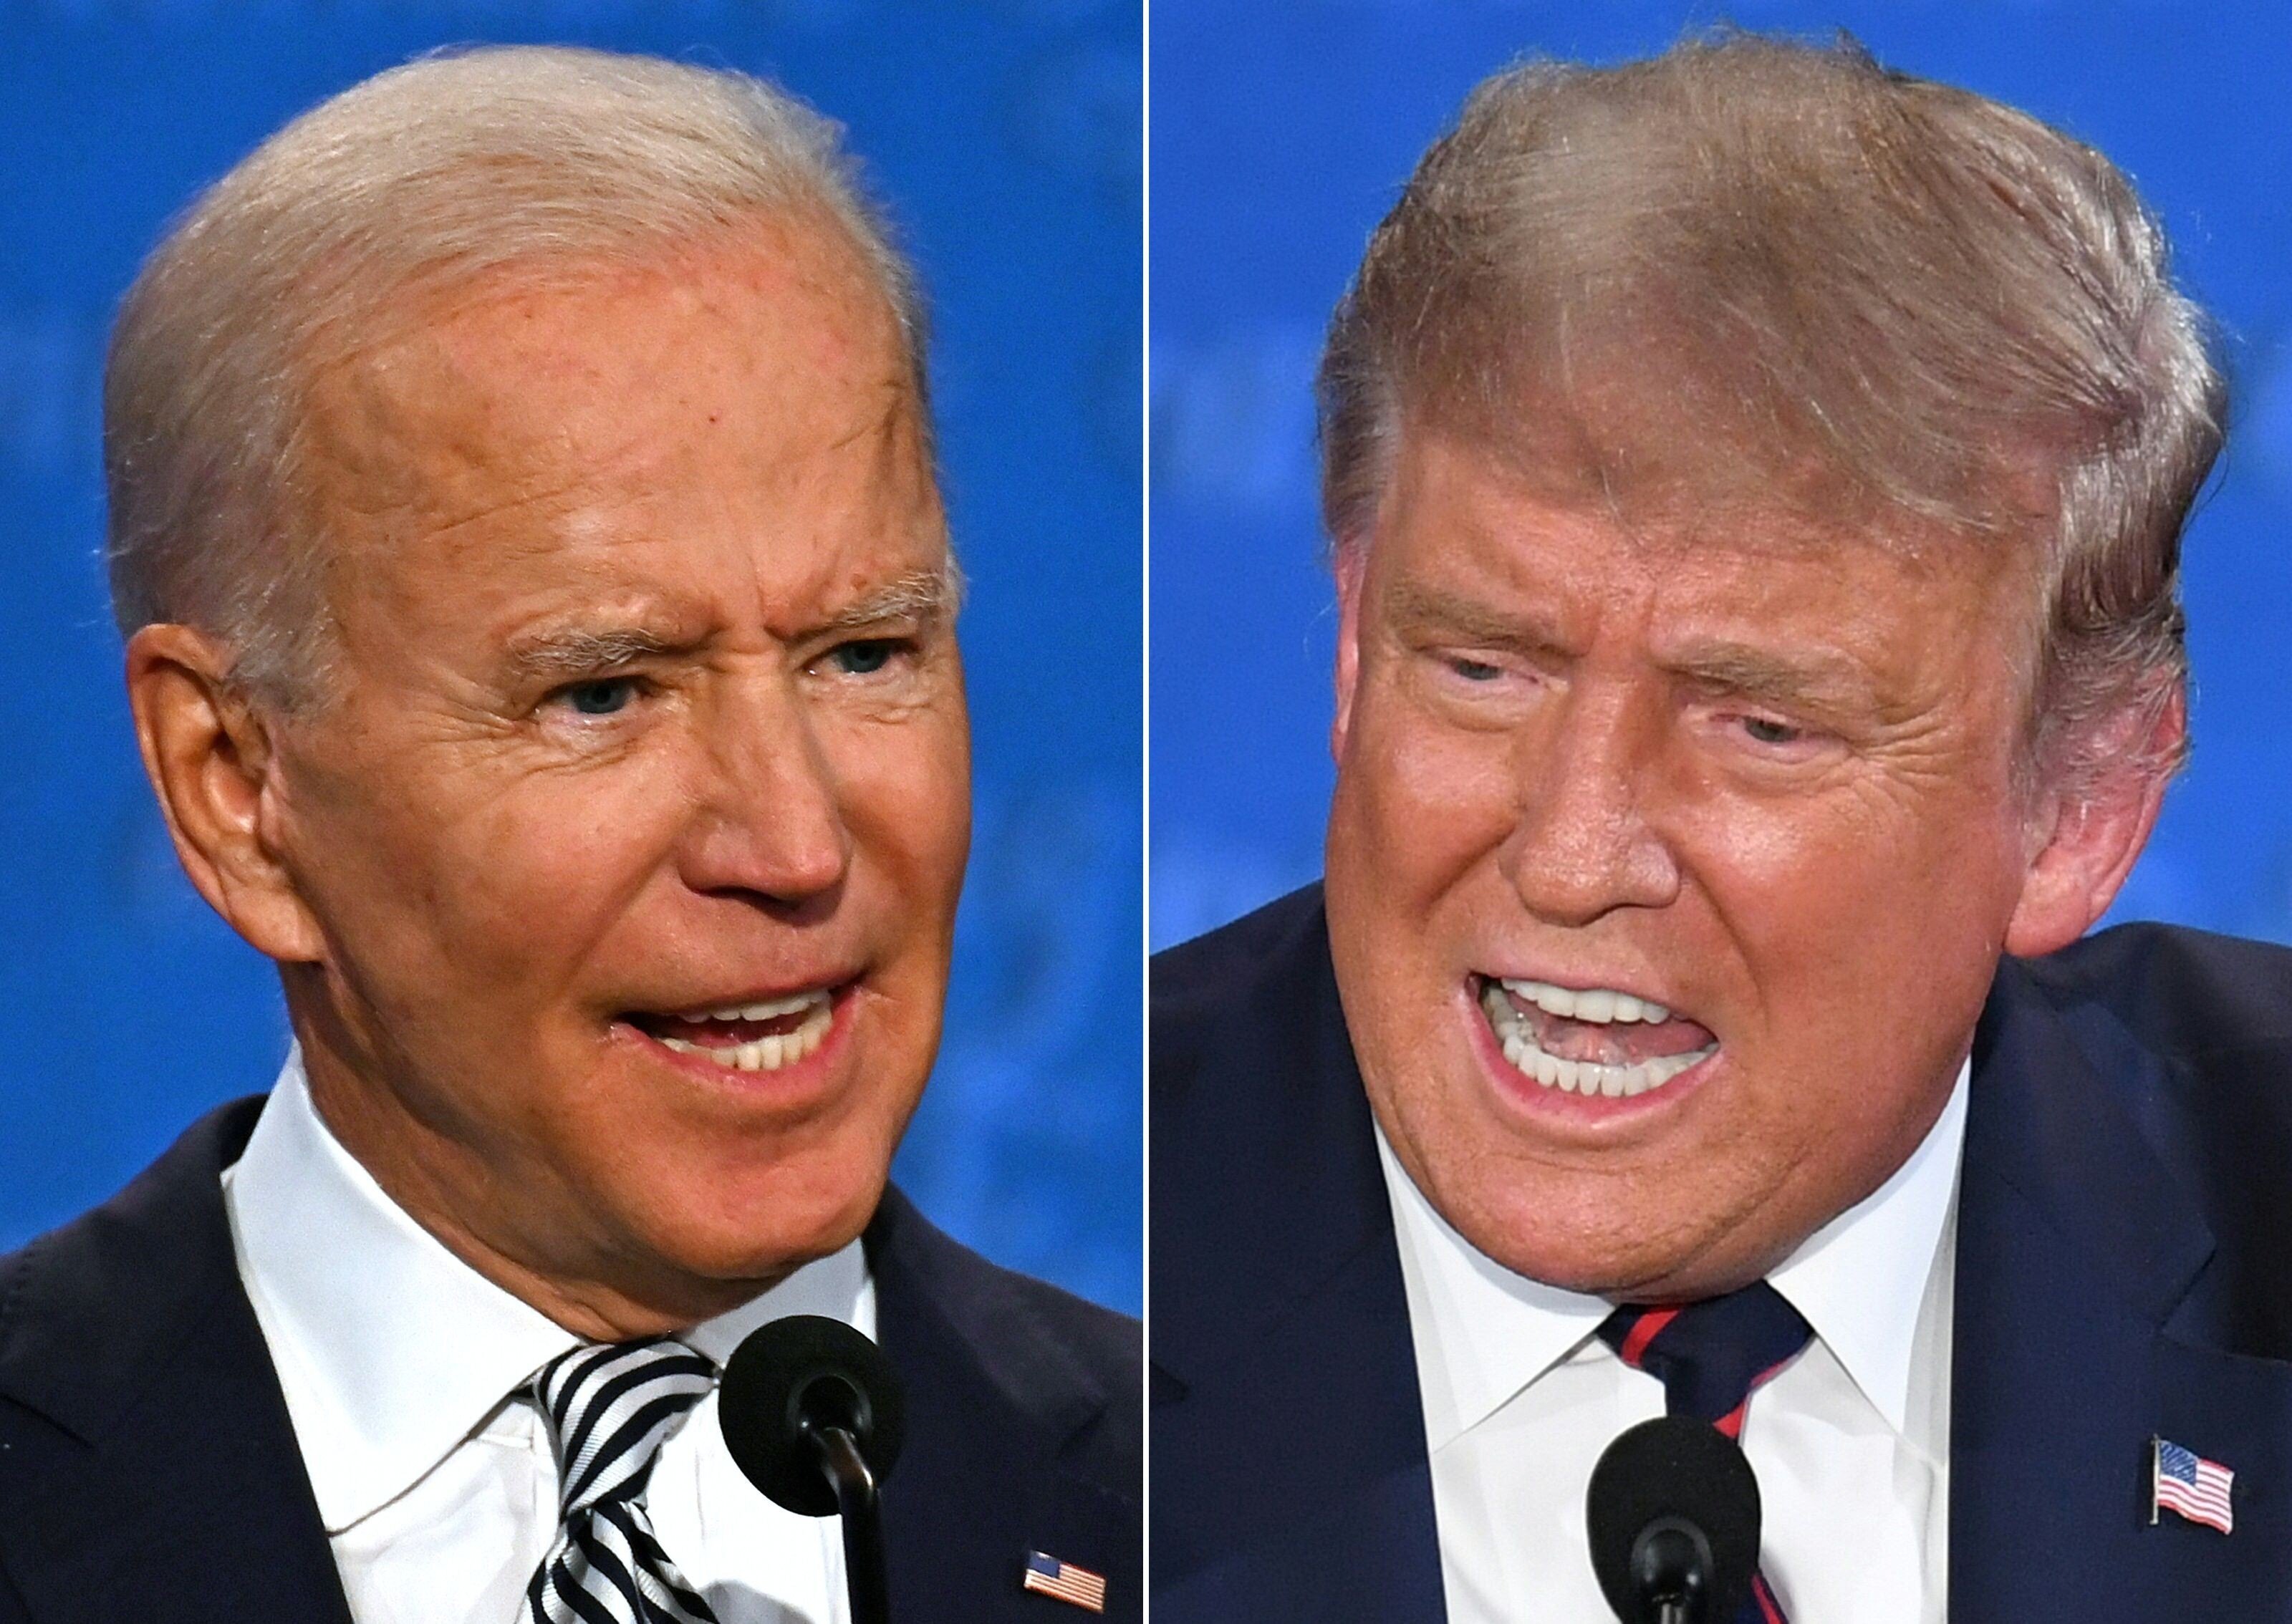 Democratic presidential candidate and former US vice-president Joe Biden (left) and President Donald Trump speak during the first presidential debate. Photo: AFP